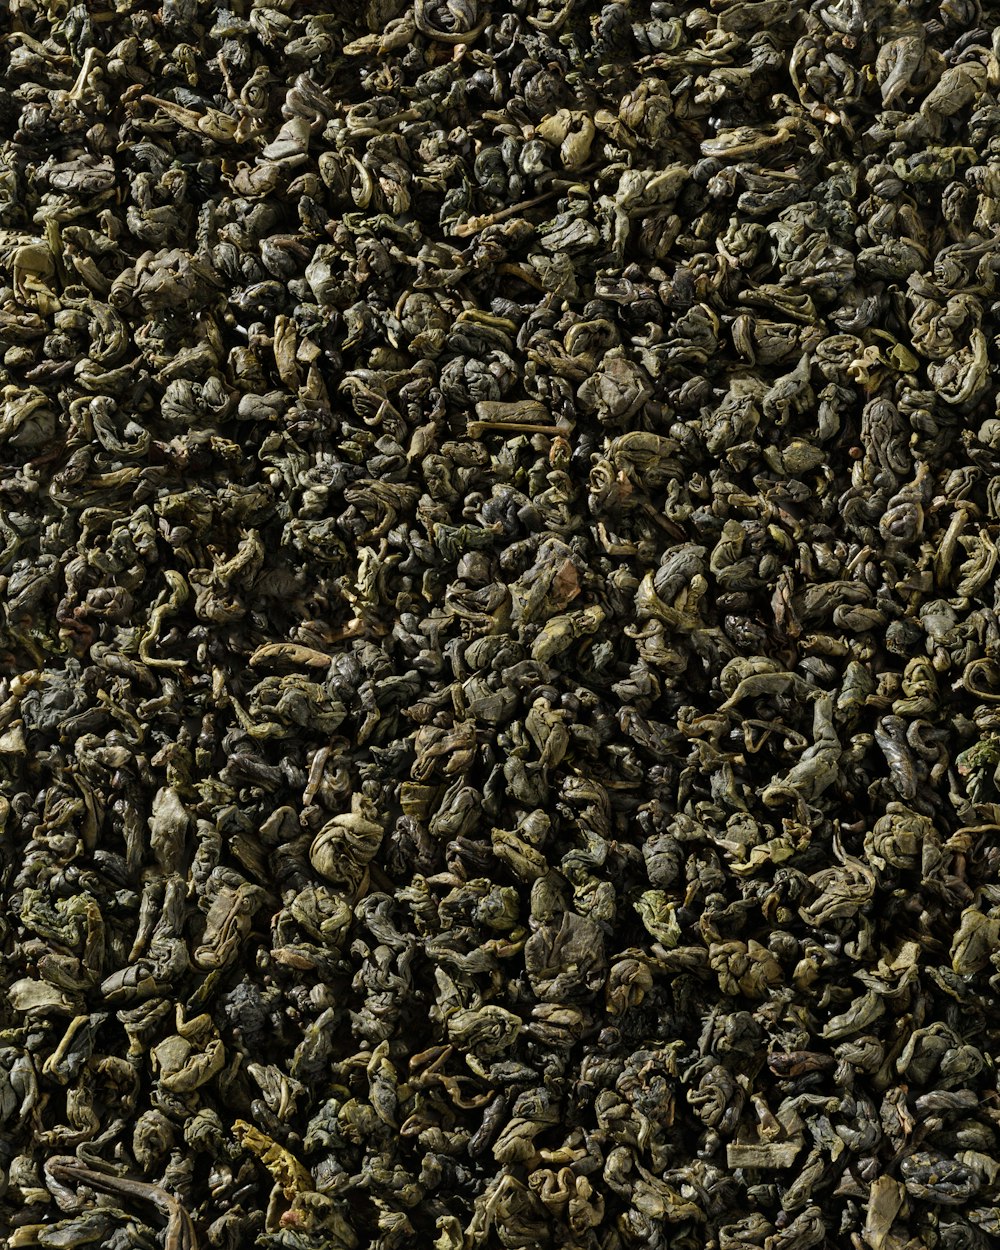 a close up of a pile of dried herbs